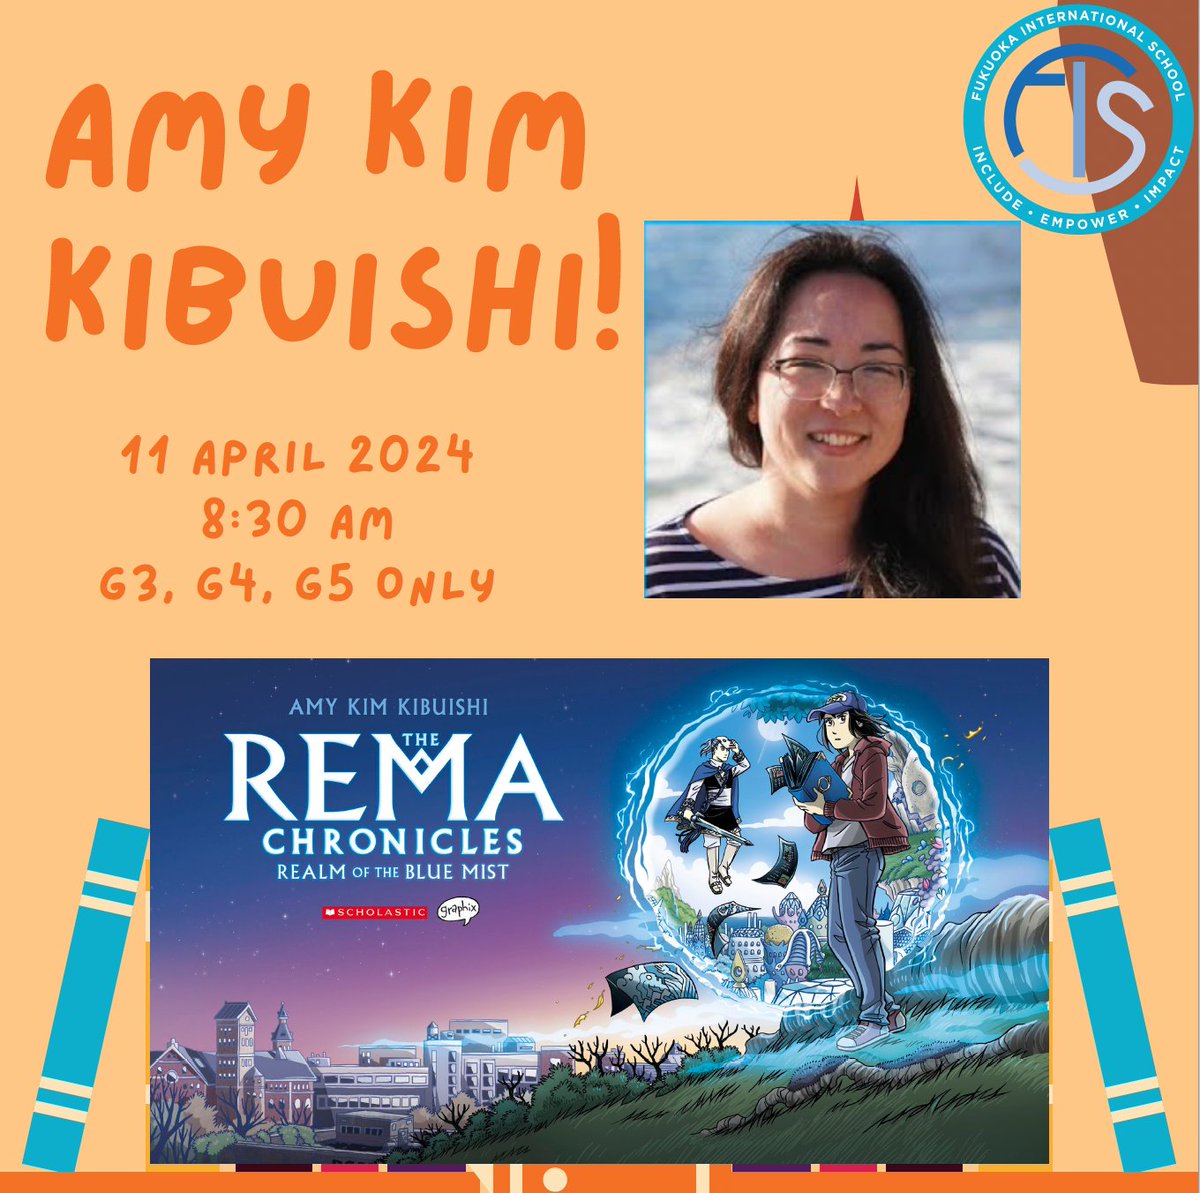 Excited to for our special guest #BookWeek virtual visit from @sakuramedal nominated author, @amykibuishi! So many fun events heading our way. #read #FISreads